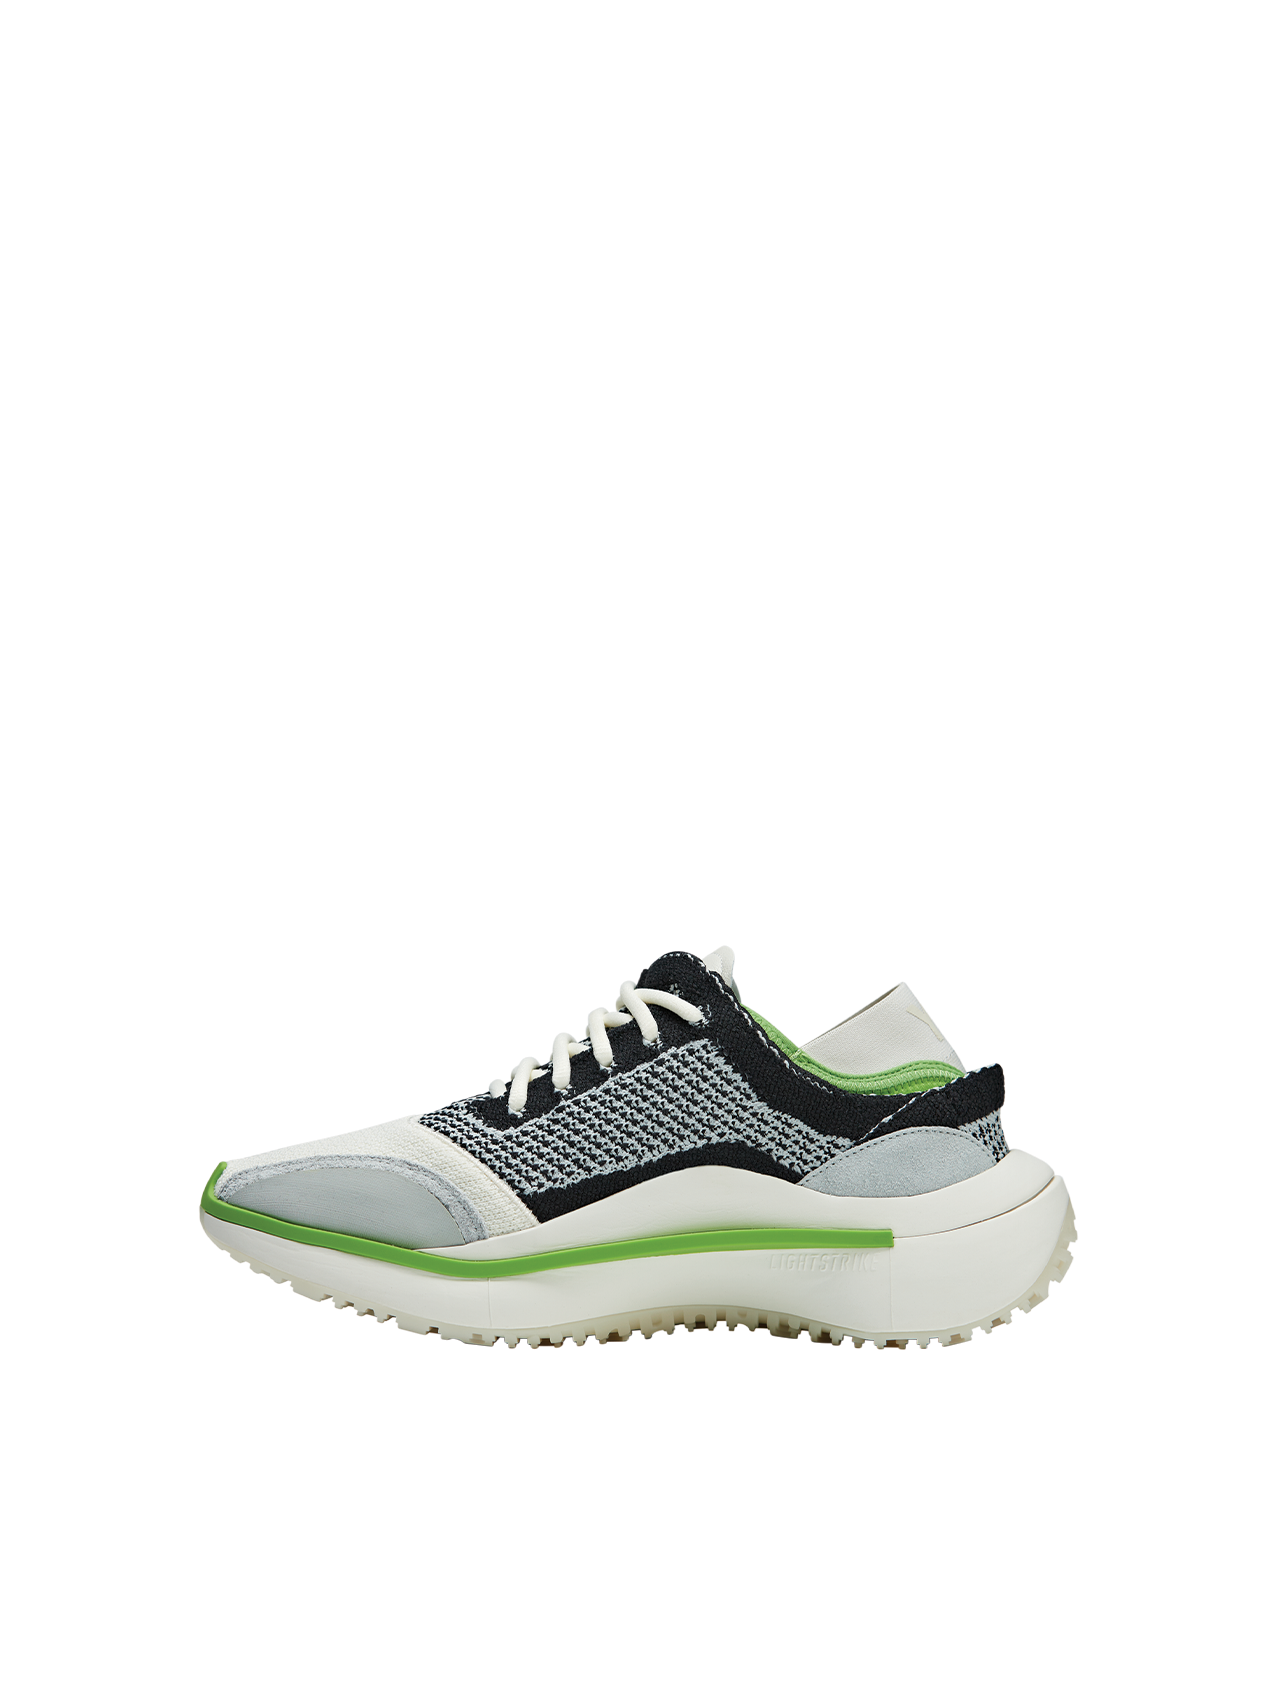 Y-3 White/Silver/Team Rave Green Qisan Knit Sneakers